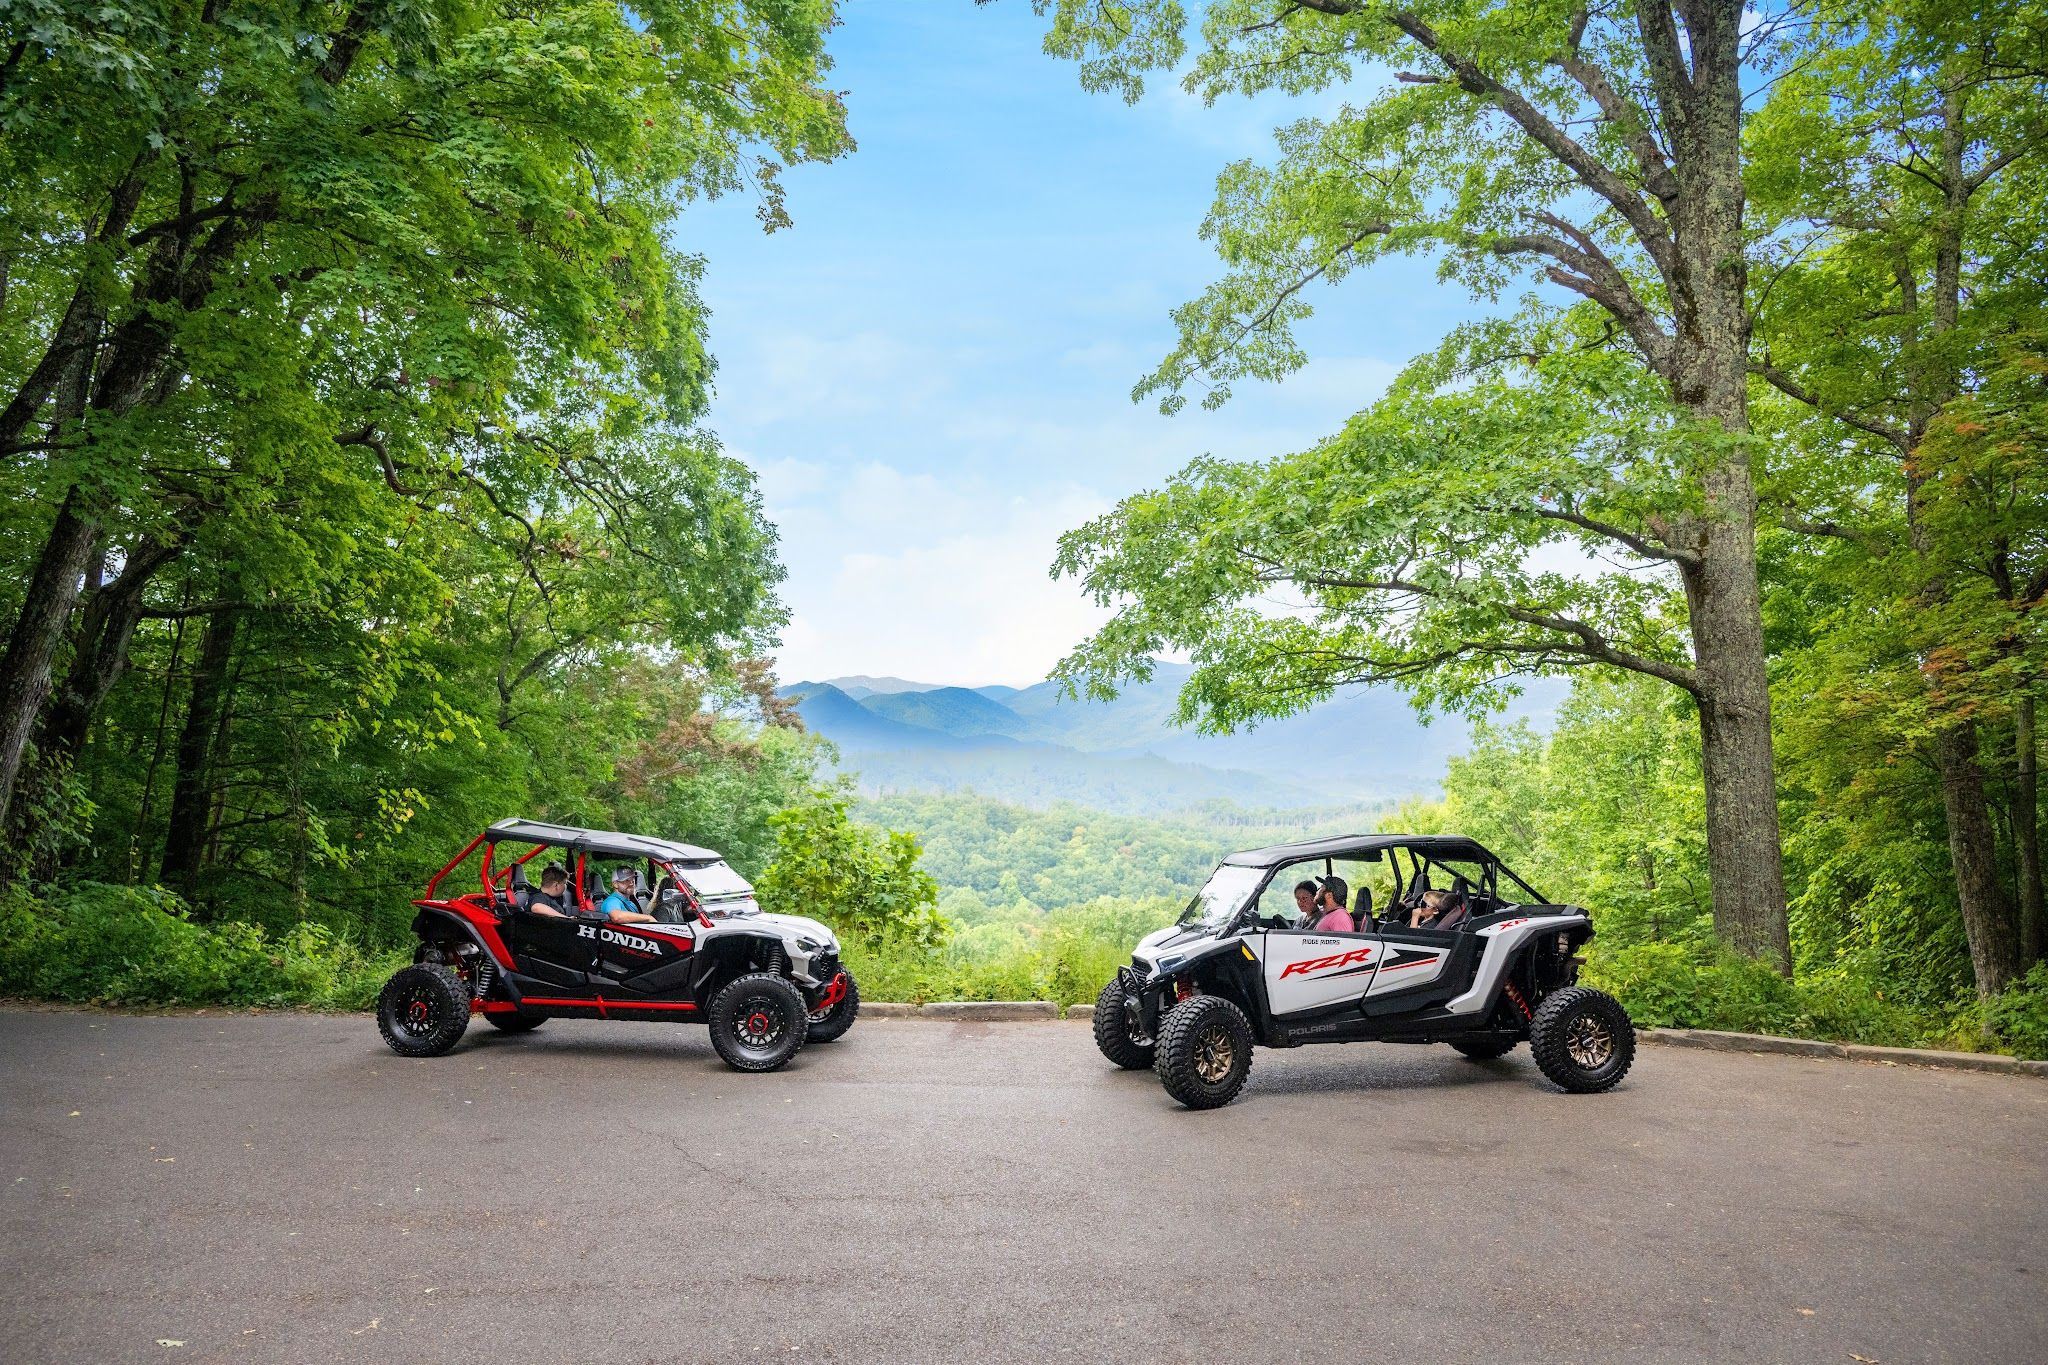 Services & Products Ridge Riders UTV Rentals in Pigeon Forge TN